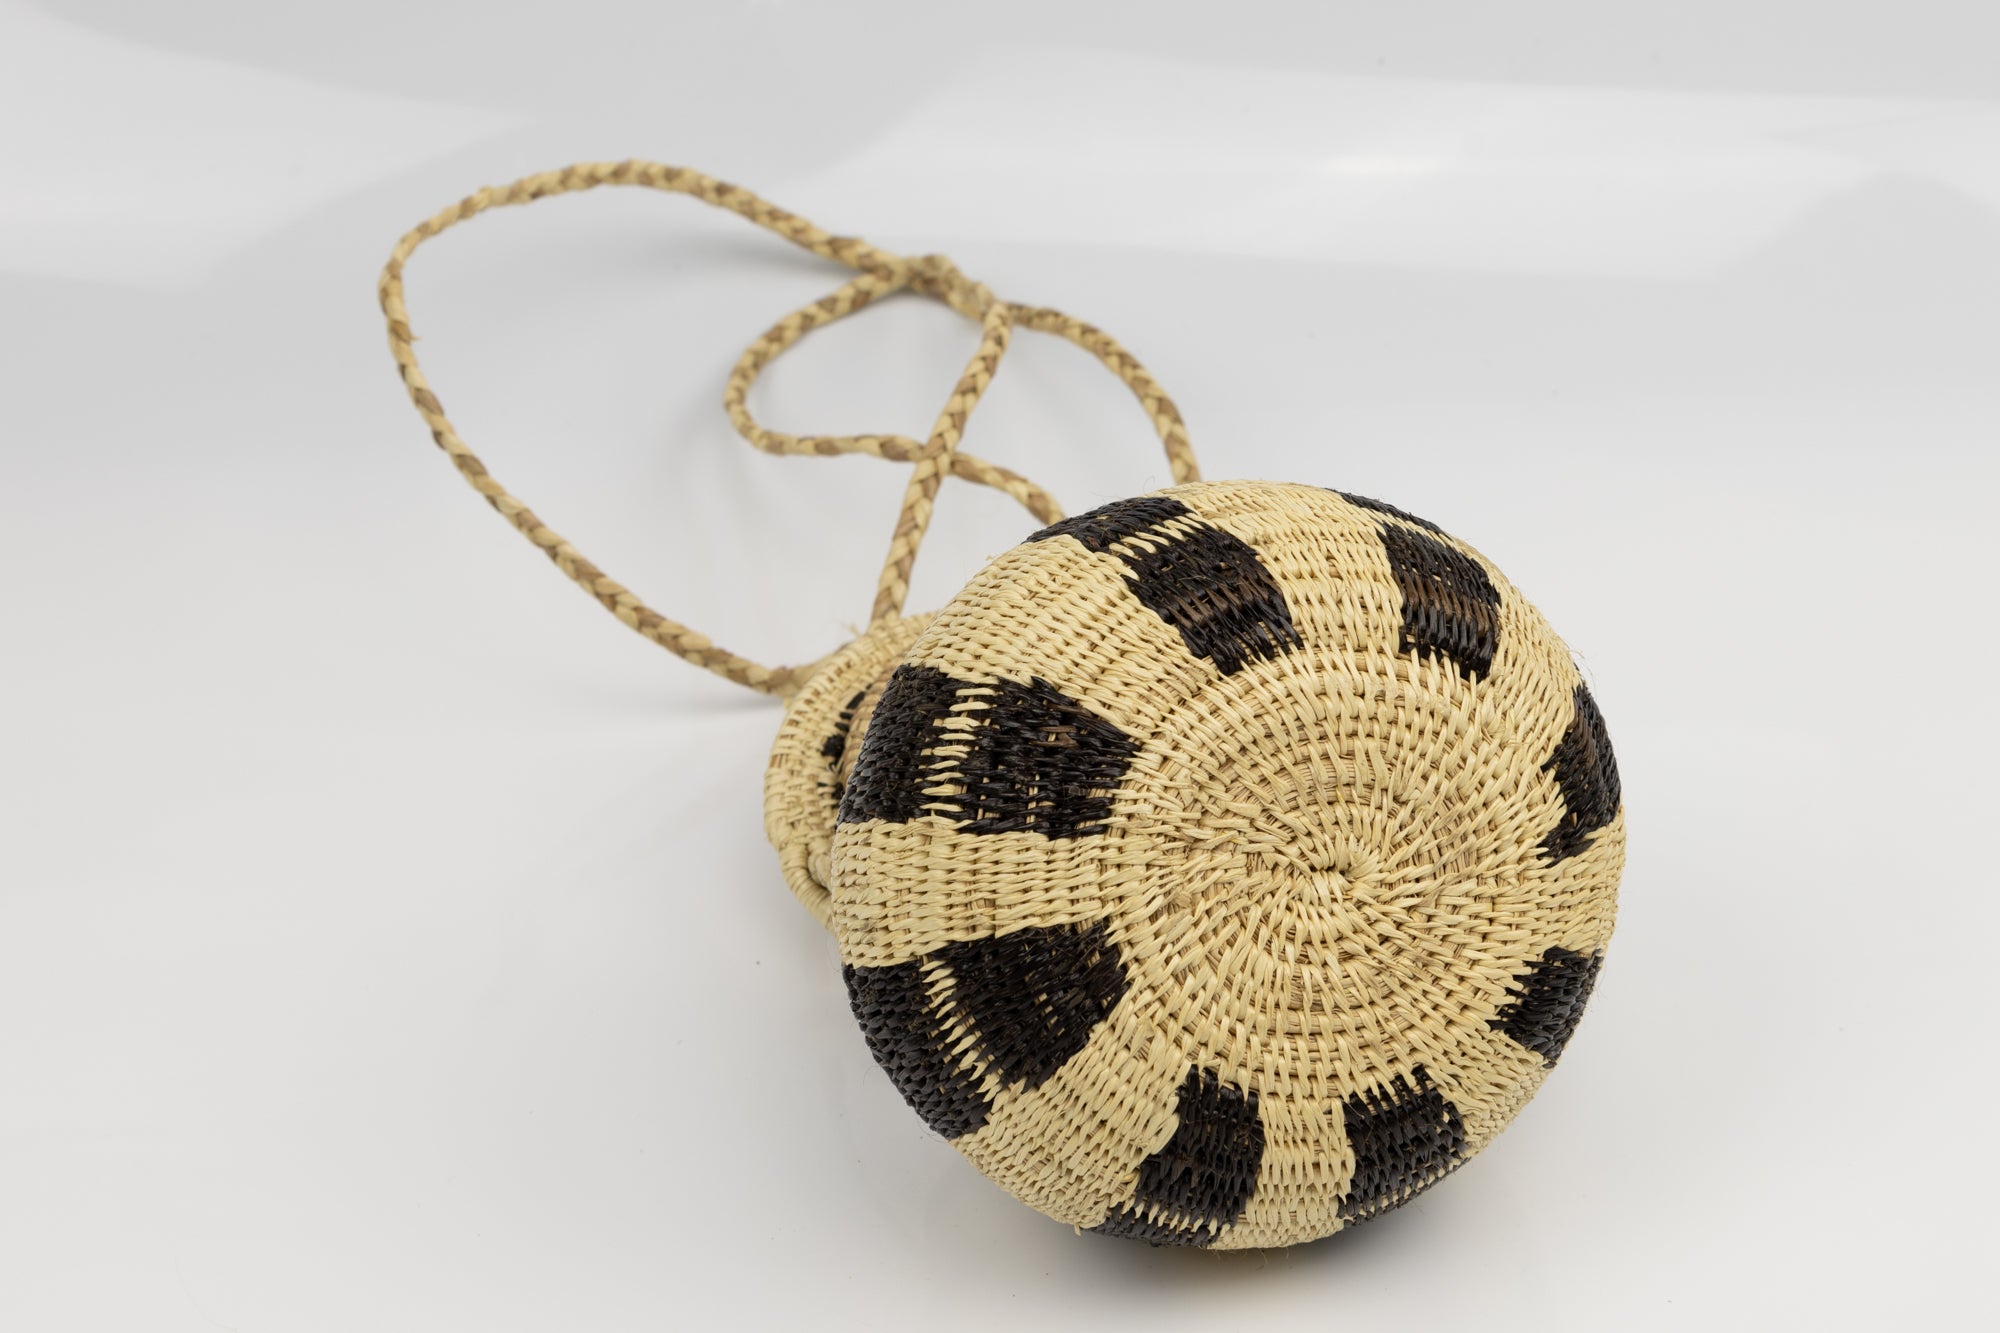 Hand Woven Vintage Hanging Basket Made By Indigenous Artisans